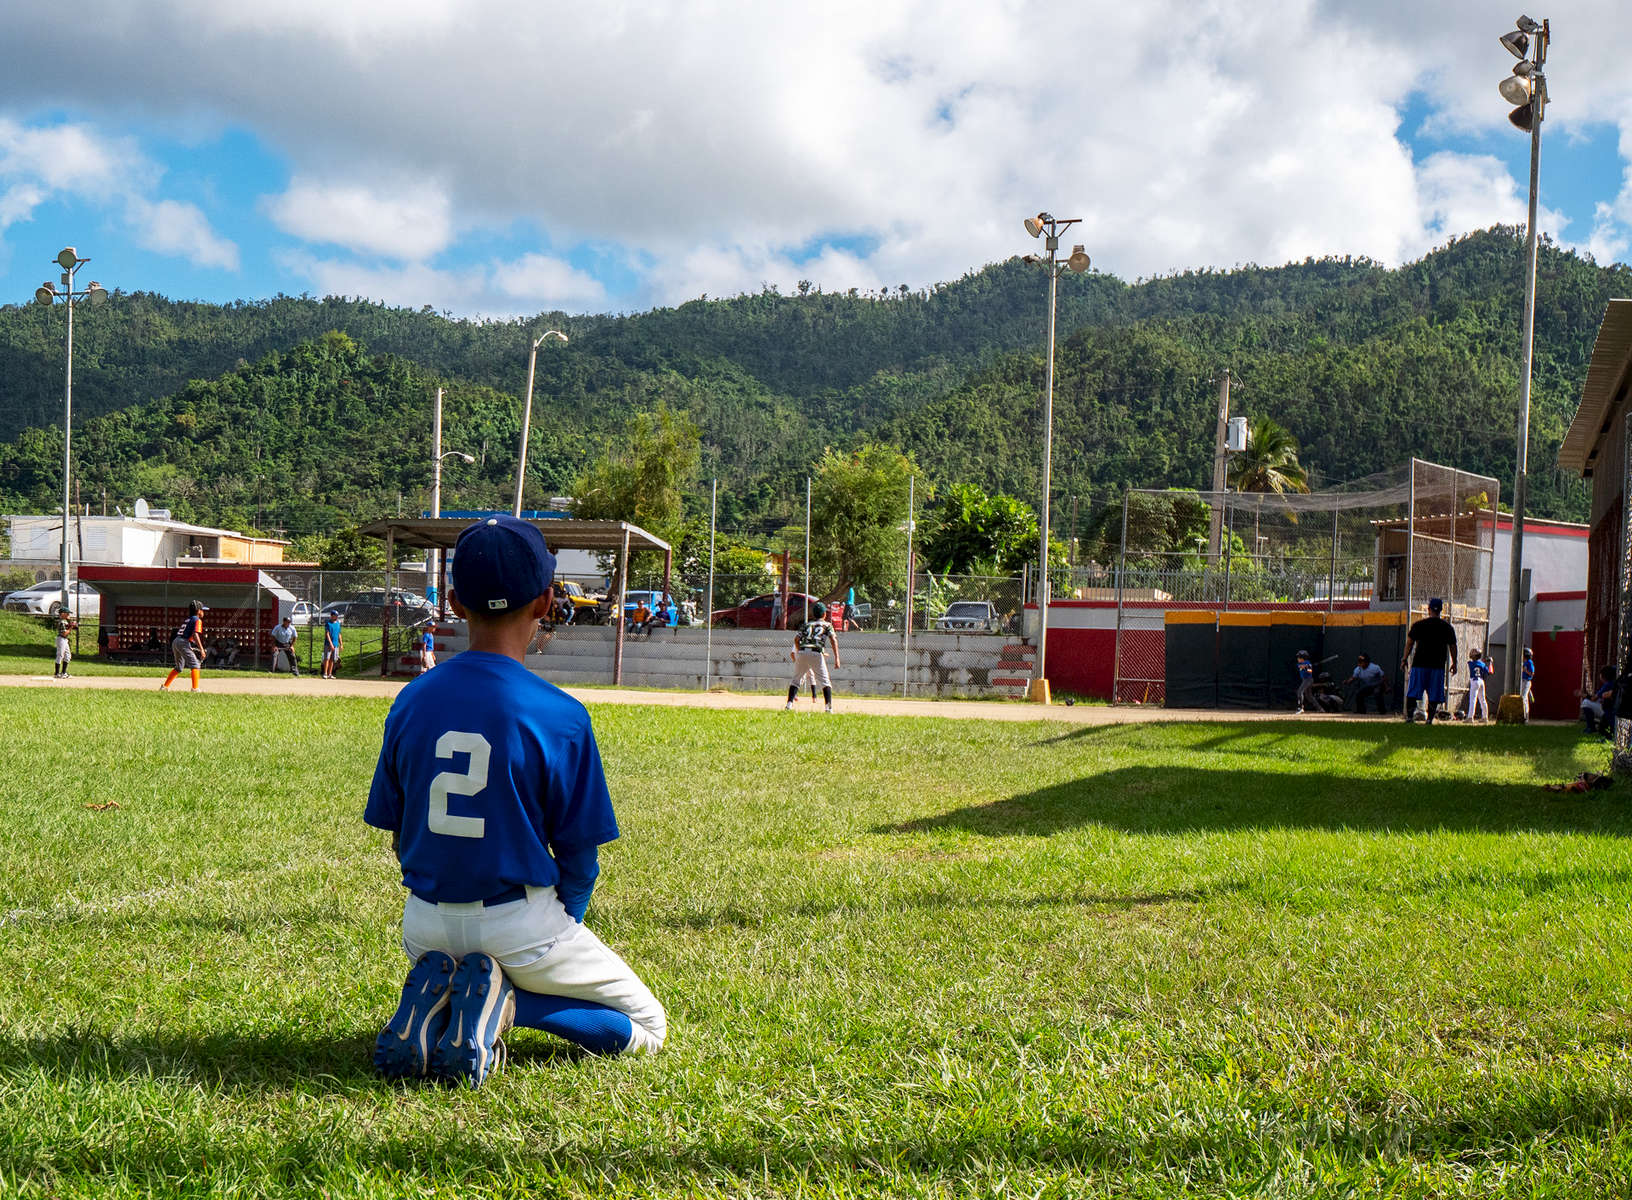 CAYEY, PUERTO RICO - NOVEMBER 10: A boy looks on during a Little League baseball game on November 10, 2018 in Cayey, Puerto Rico. The effort continues in Puerto Rico to remain and rebuild more than one year after the Hurricane Maria hit and devastated the island on September 20, 2017. The official number of deaths from the disaster is 2,975. 